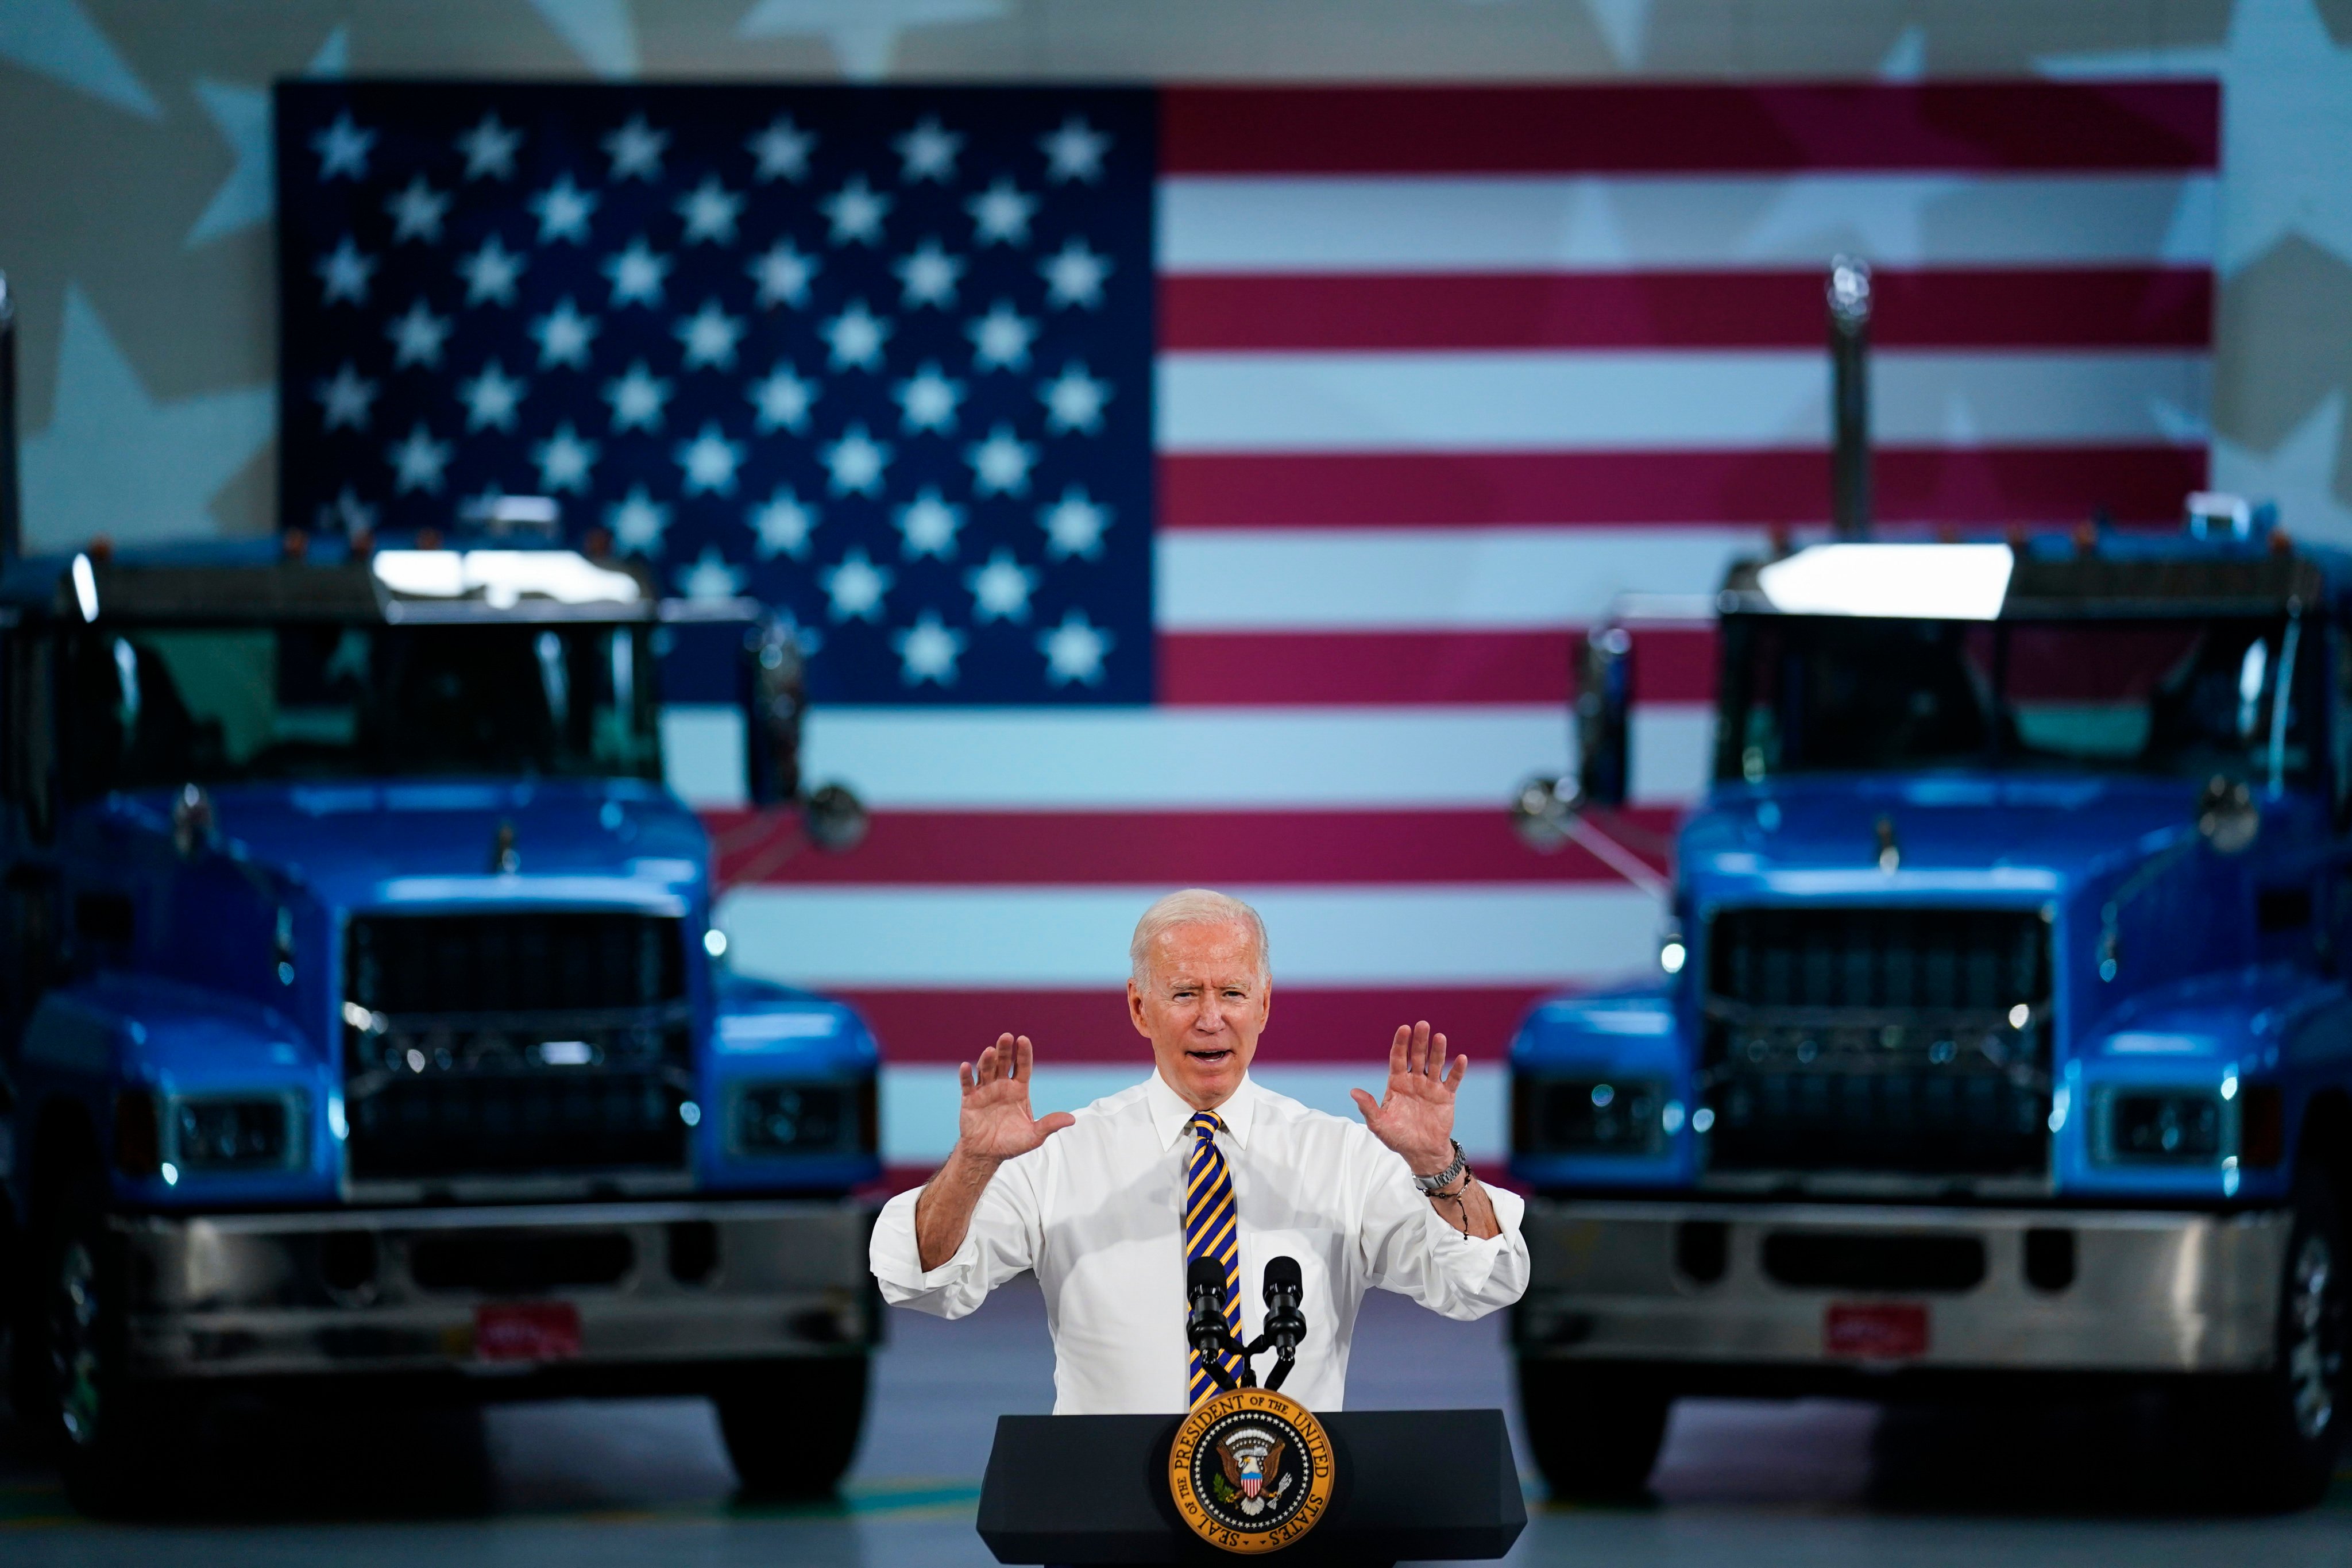 US President Joe Biden speaks during a visit to an operations facility for American truck manufacturing company Mack Trucks in Pennsylvania on July 28, 2021. Photo: AP